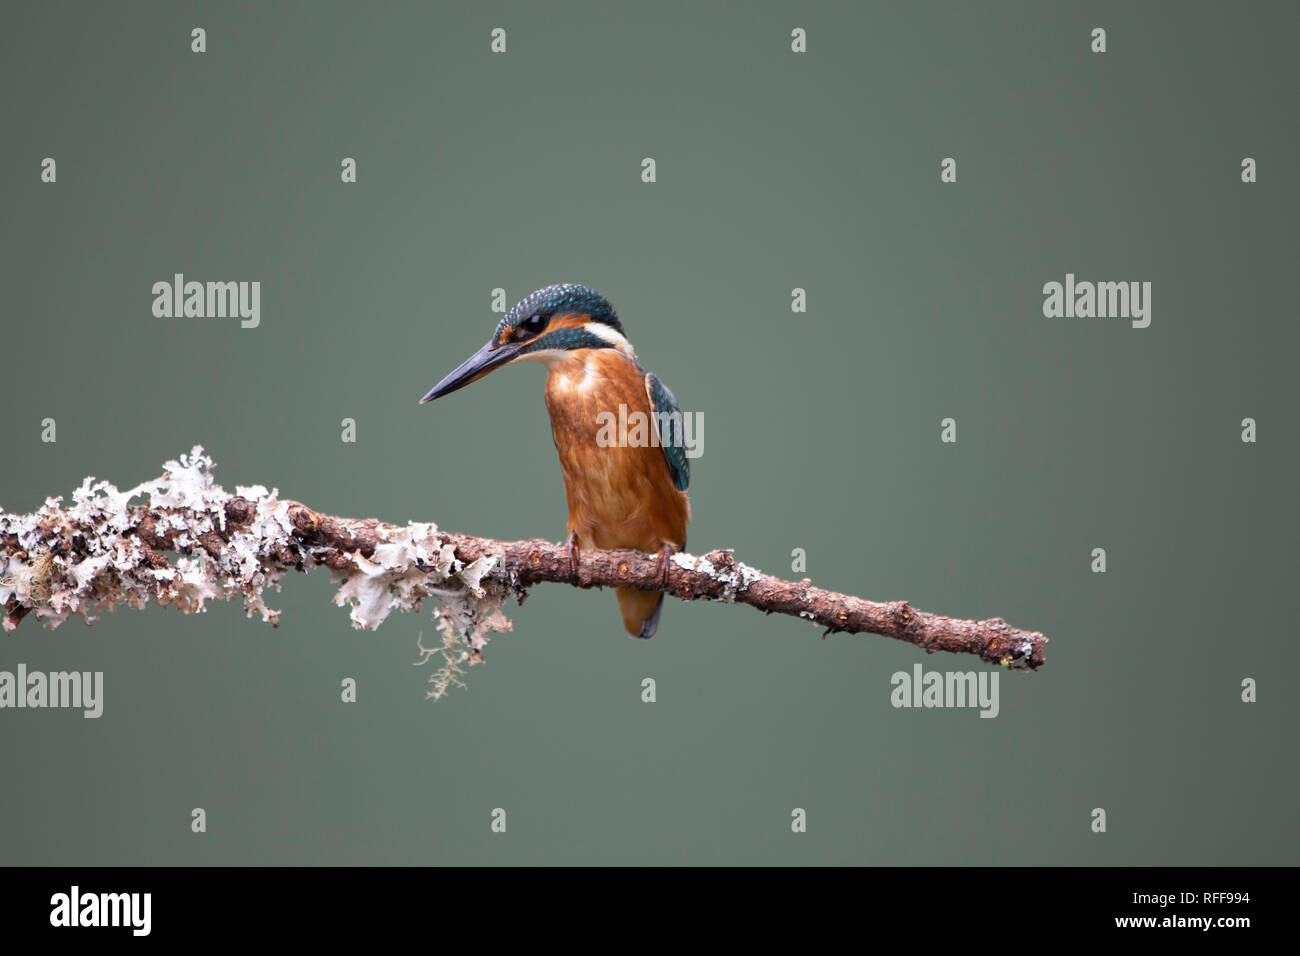 European Kingfisher on a branch Stock Photo